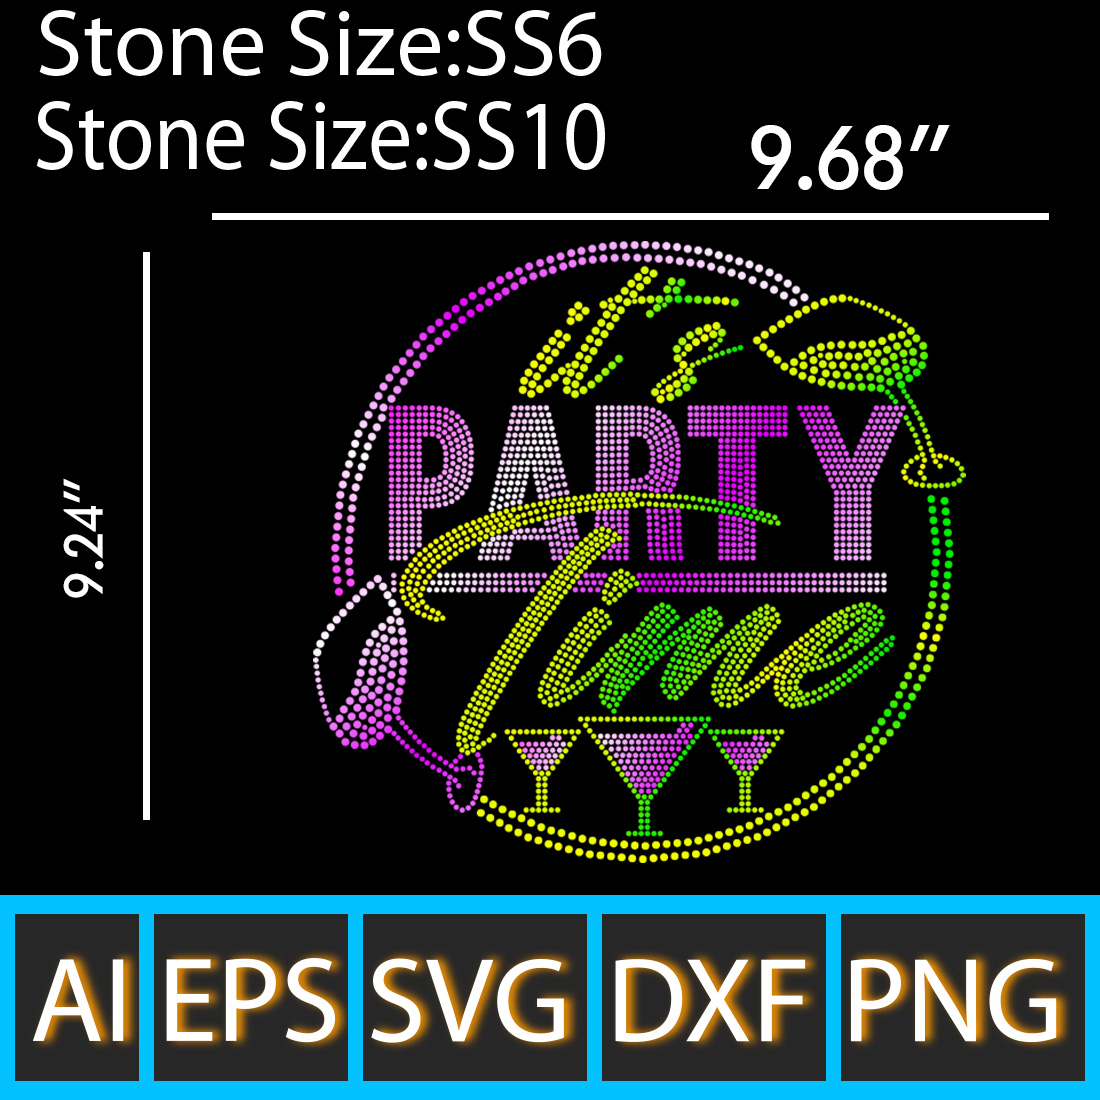 It’s Party Time Rhinestone Templates Design cover image.